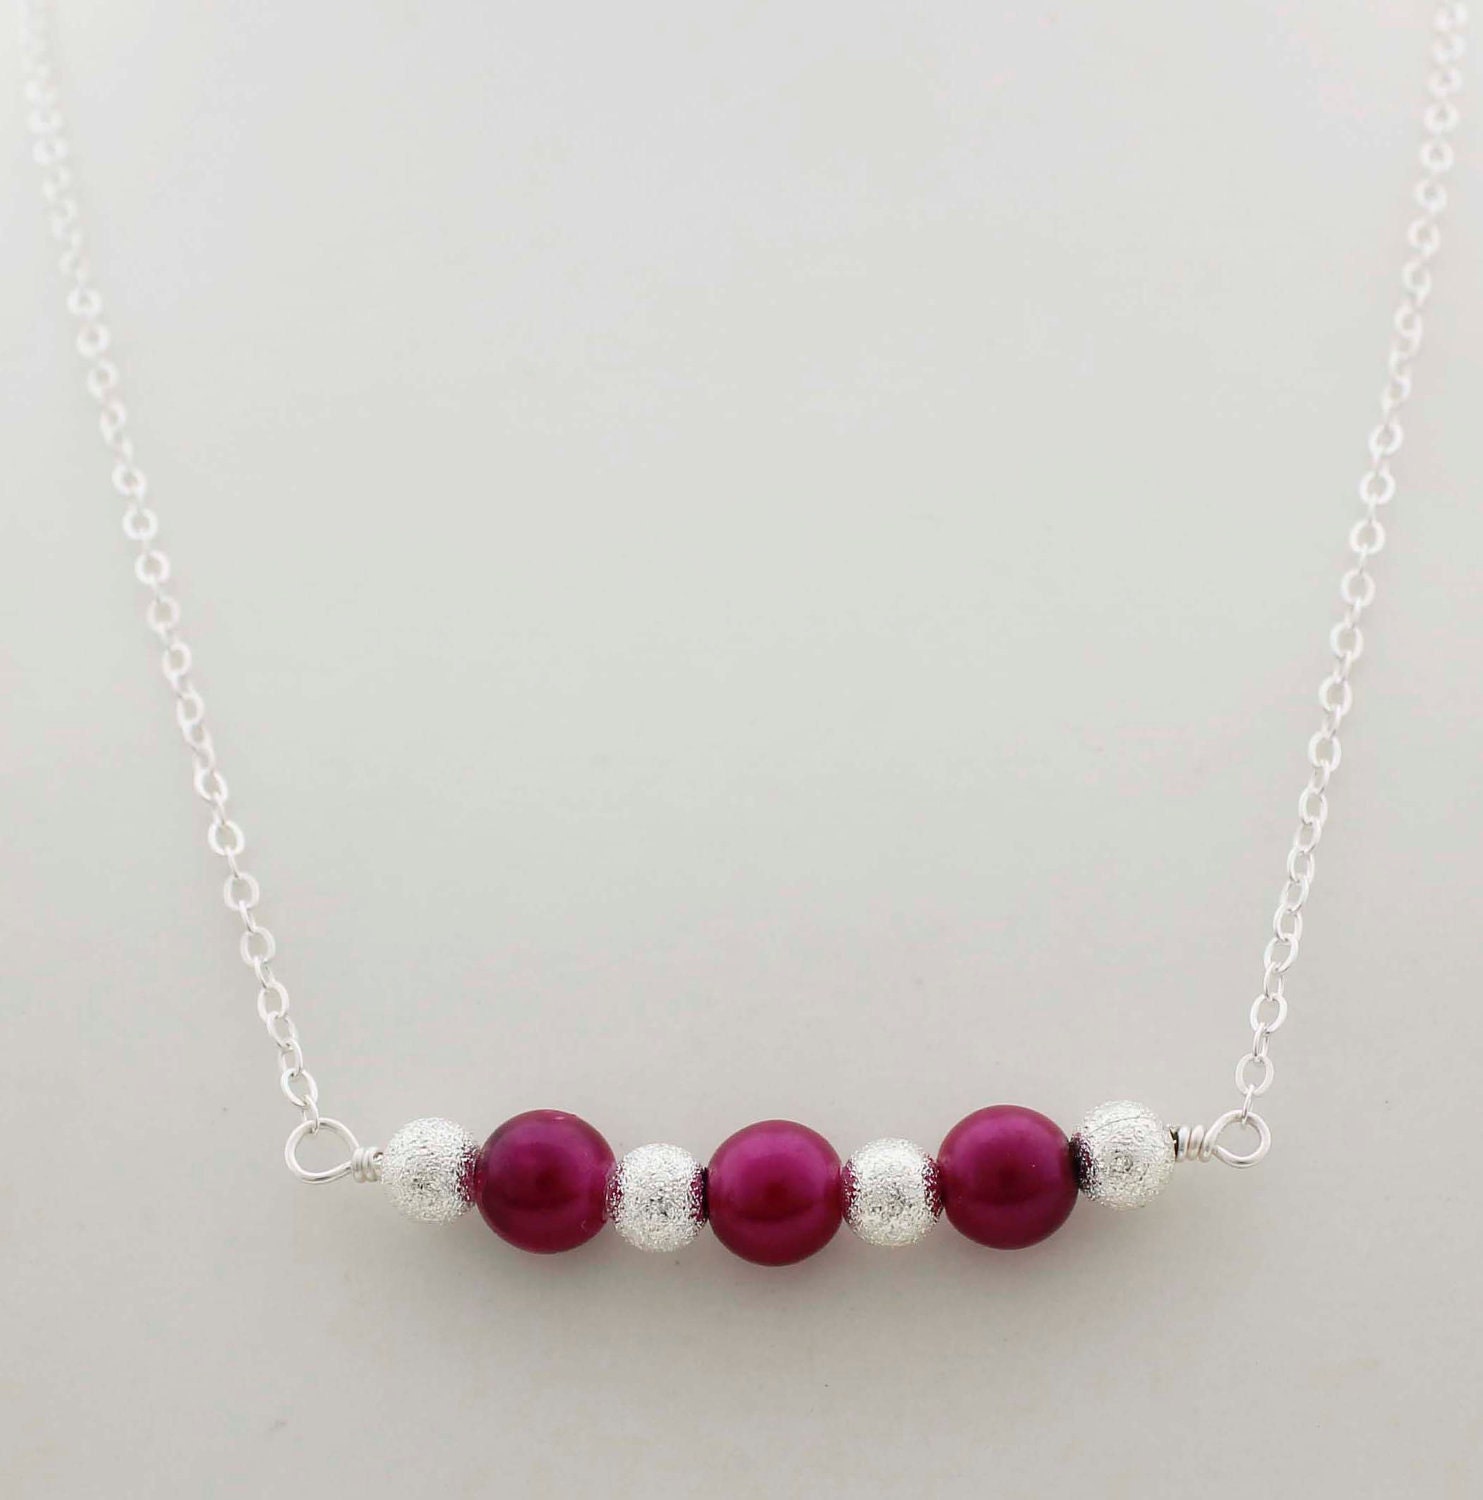 Burgundy Necklace, Bridesmaid Necklace, Pearl Glass Bead Necklace on ...